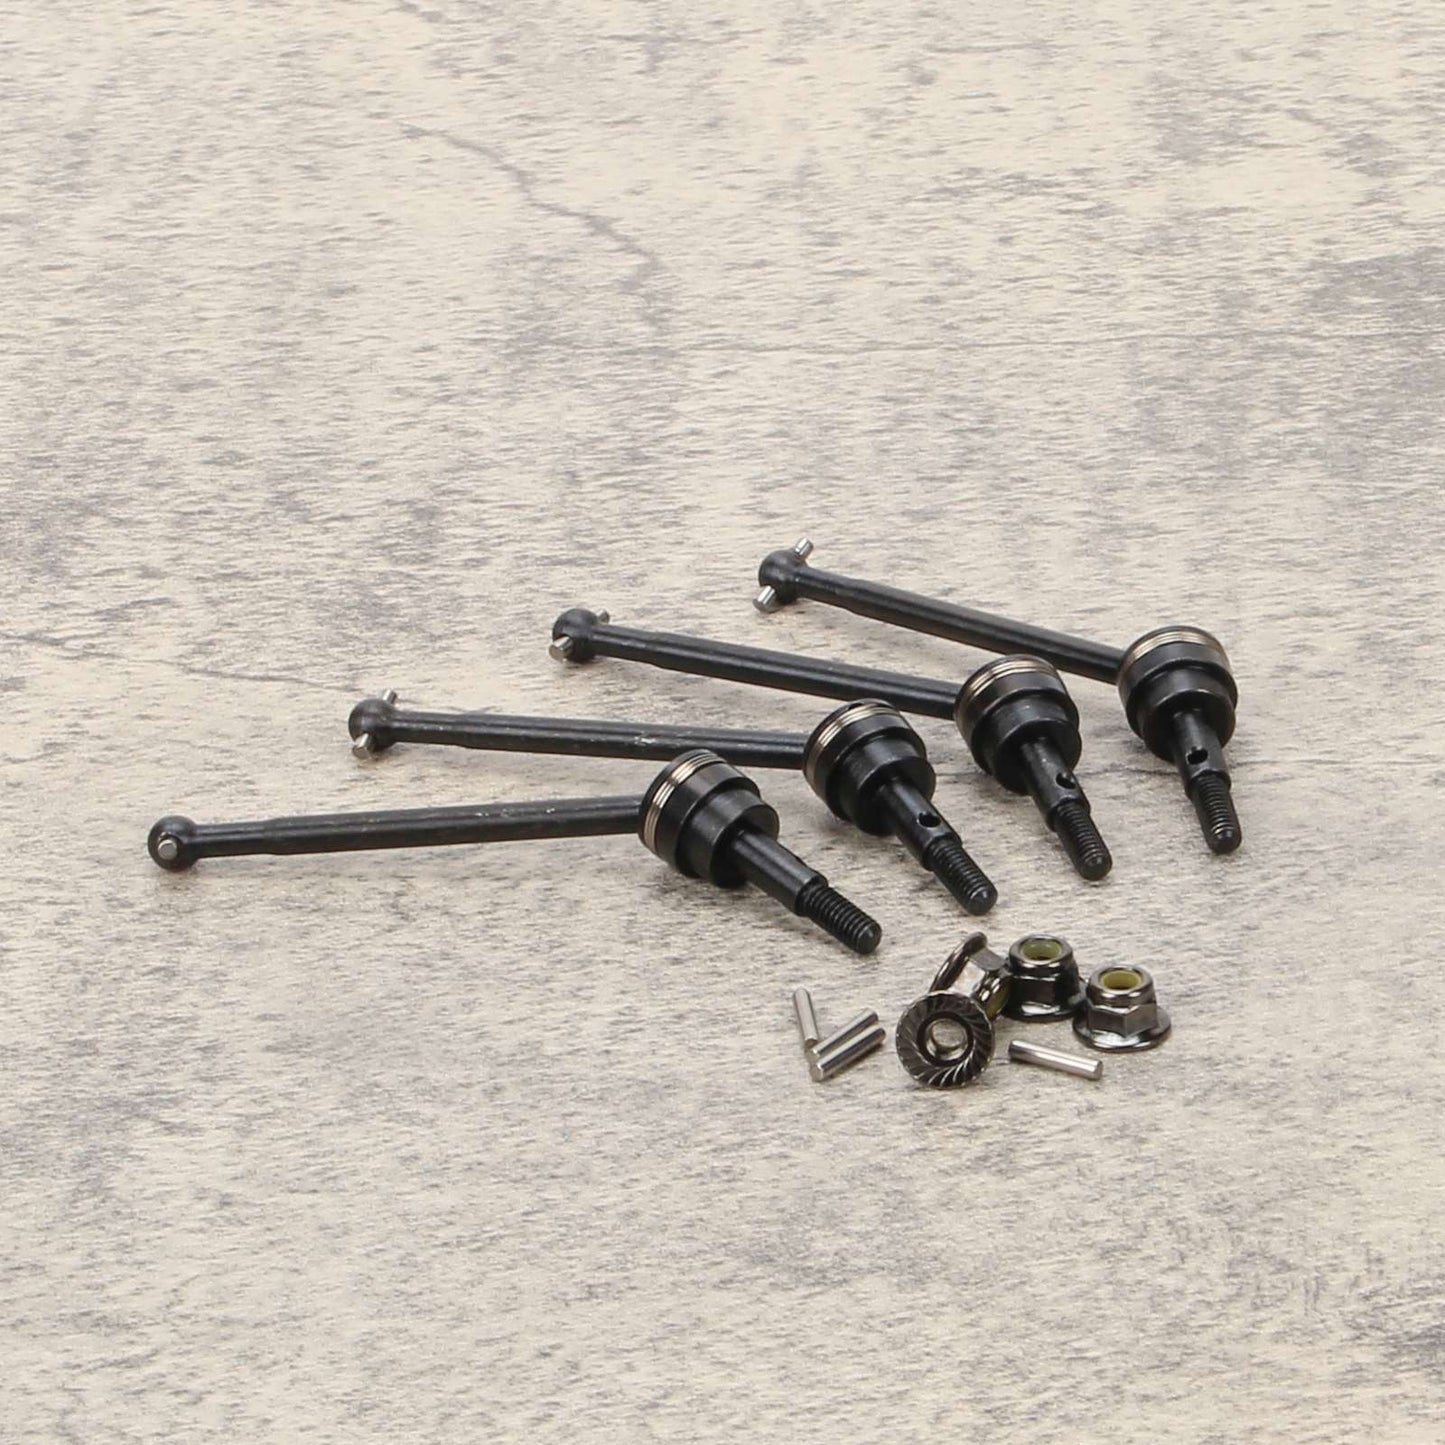 RCAWD REDCAT Volcano Black RCAWD Redcat Lightning STK Upgrades F/R CVD Driveshaft 4pcs for 1:10 Brushed Electric On Road Car